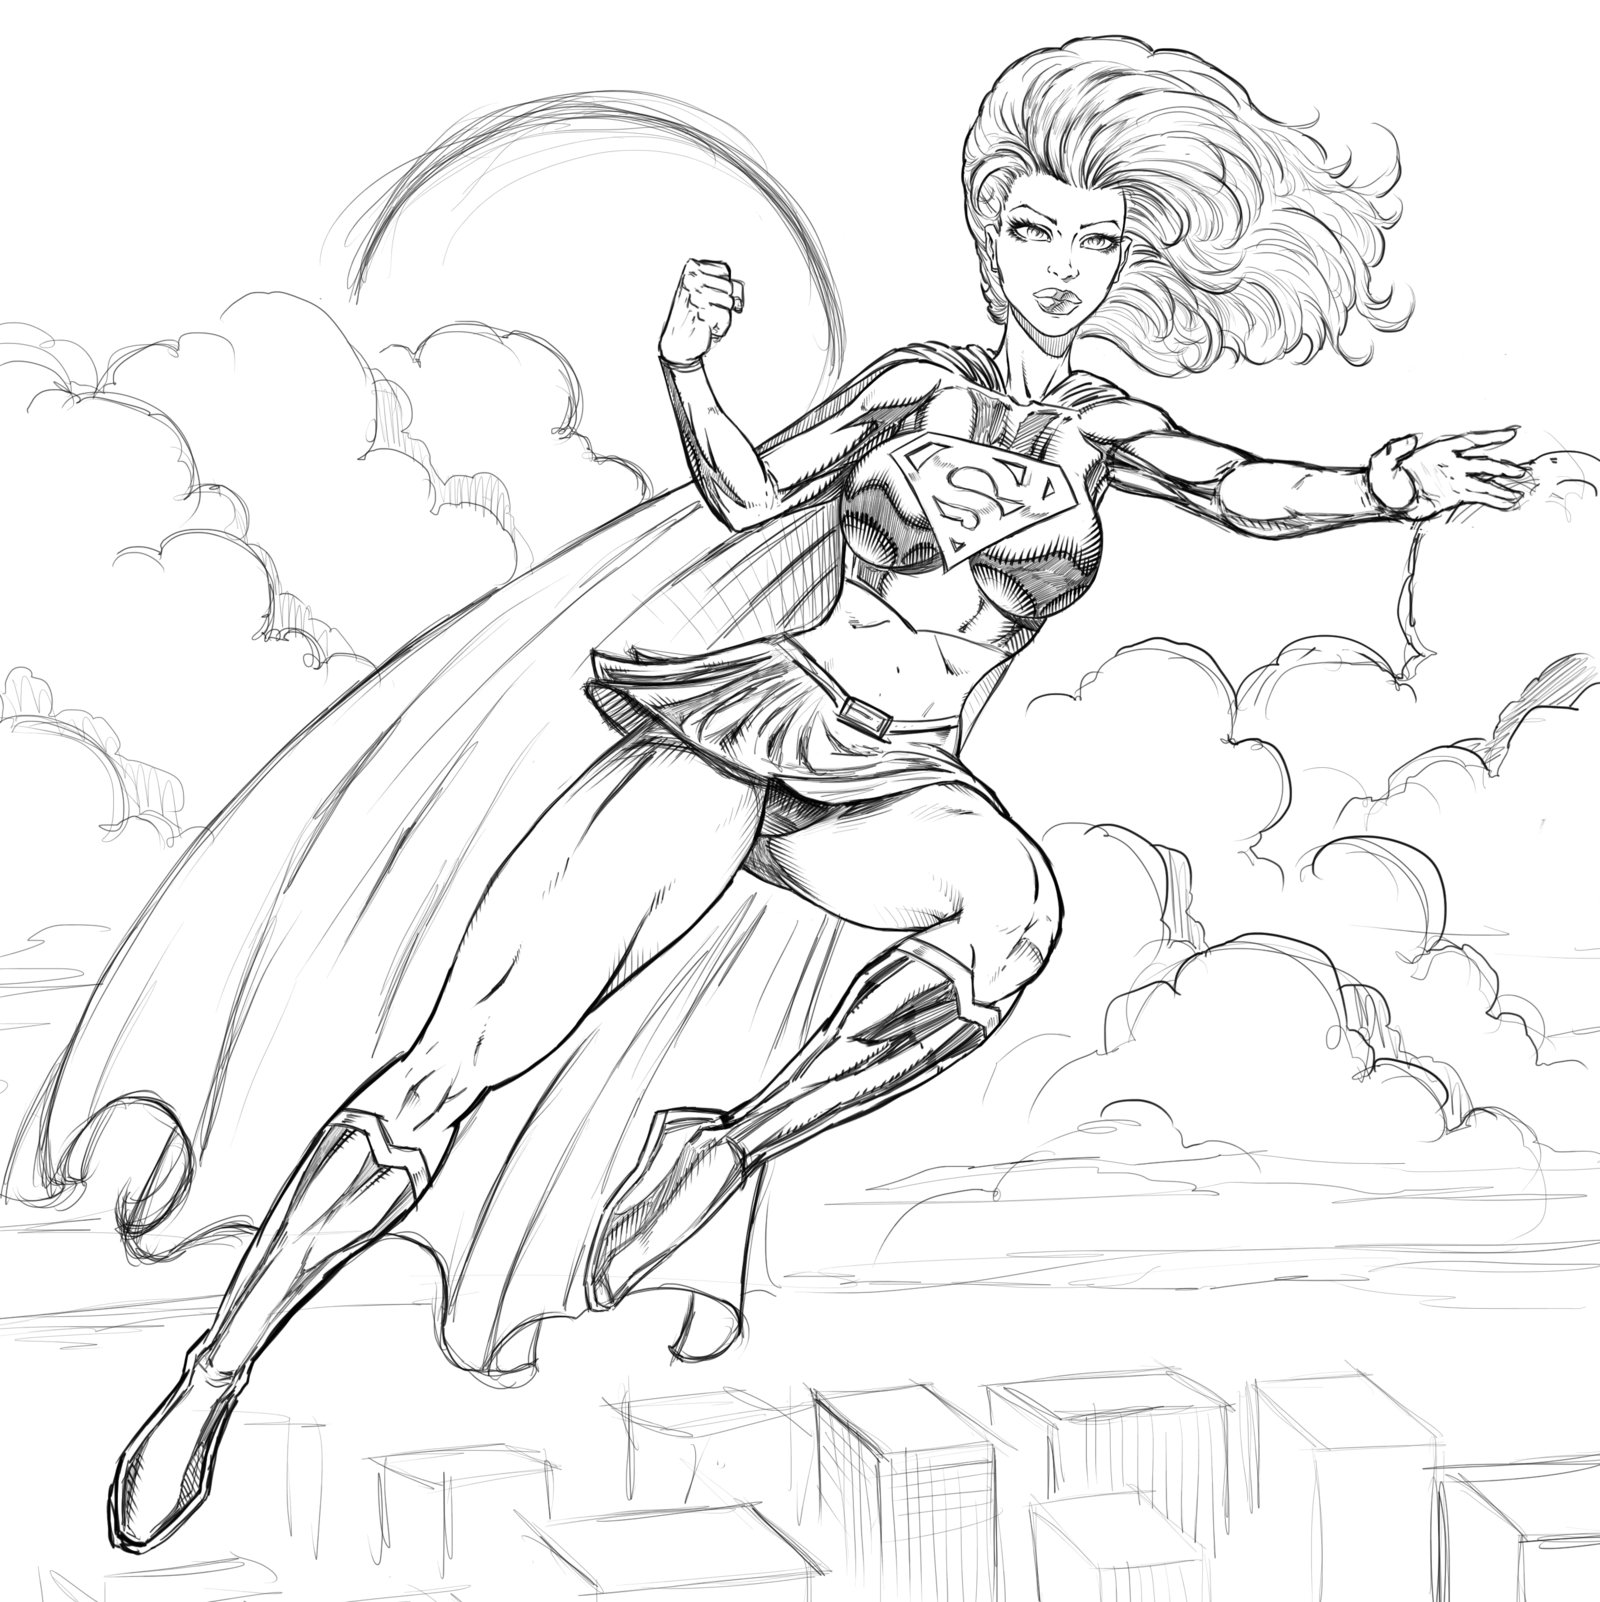 Printable 20 Girl Superhero Coloring Pages 4455 - Free Coloring ...